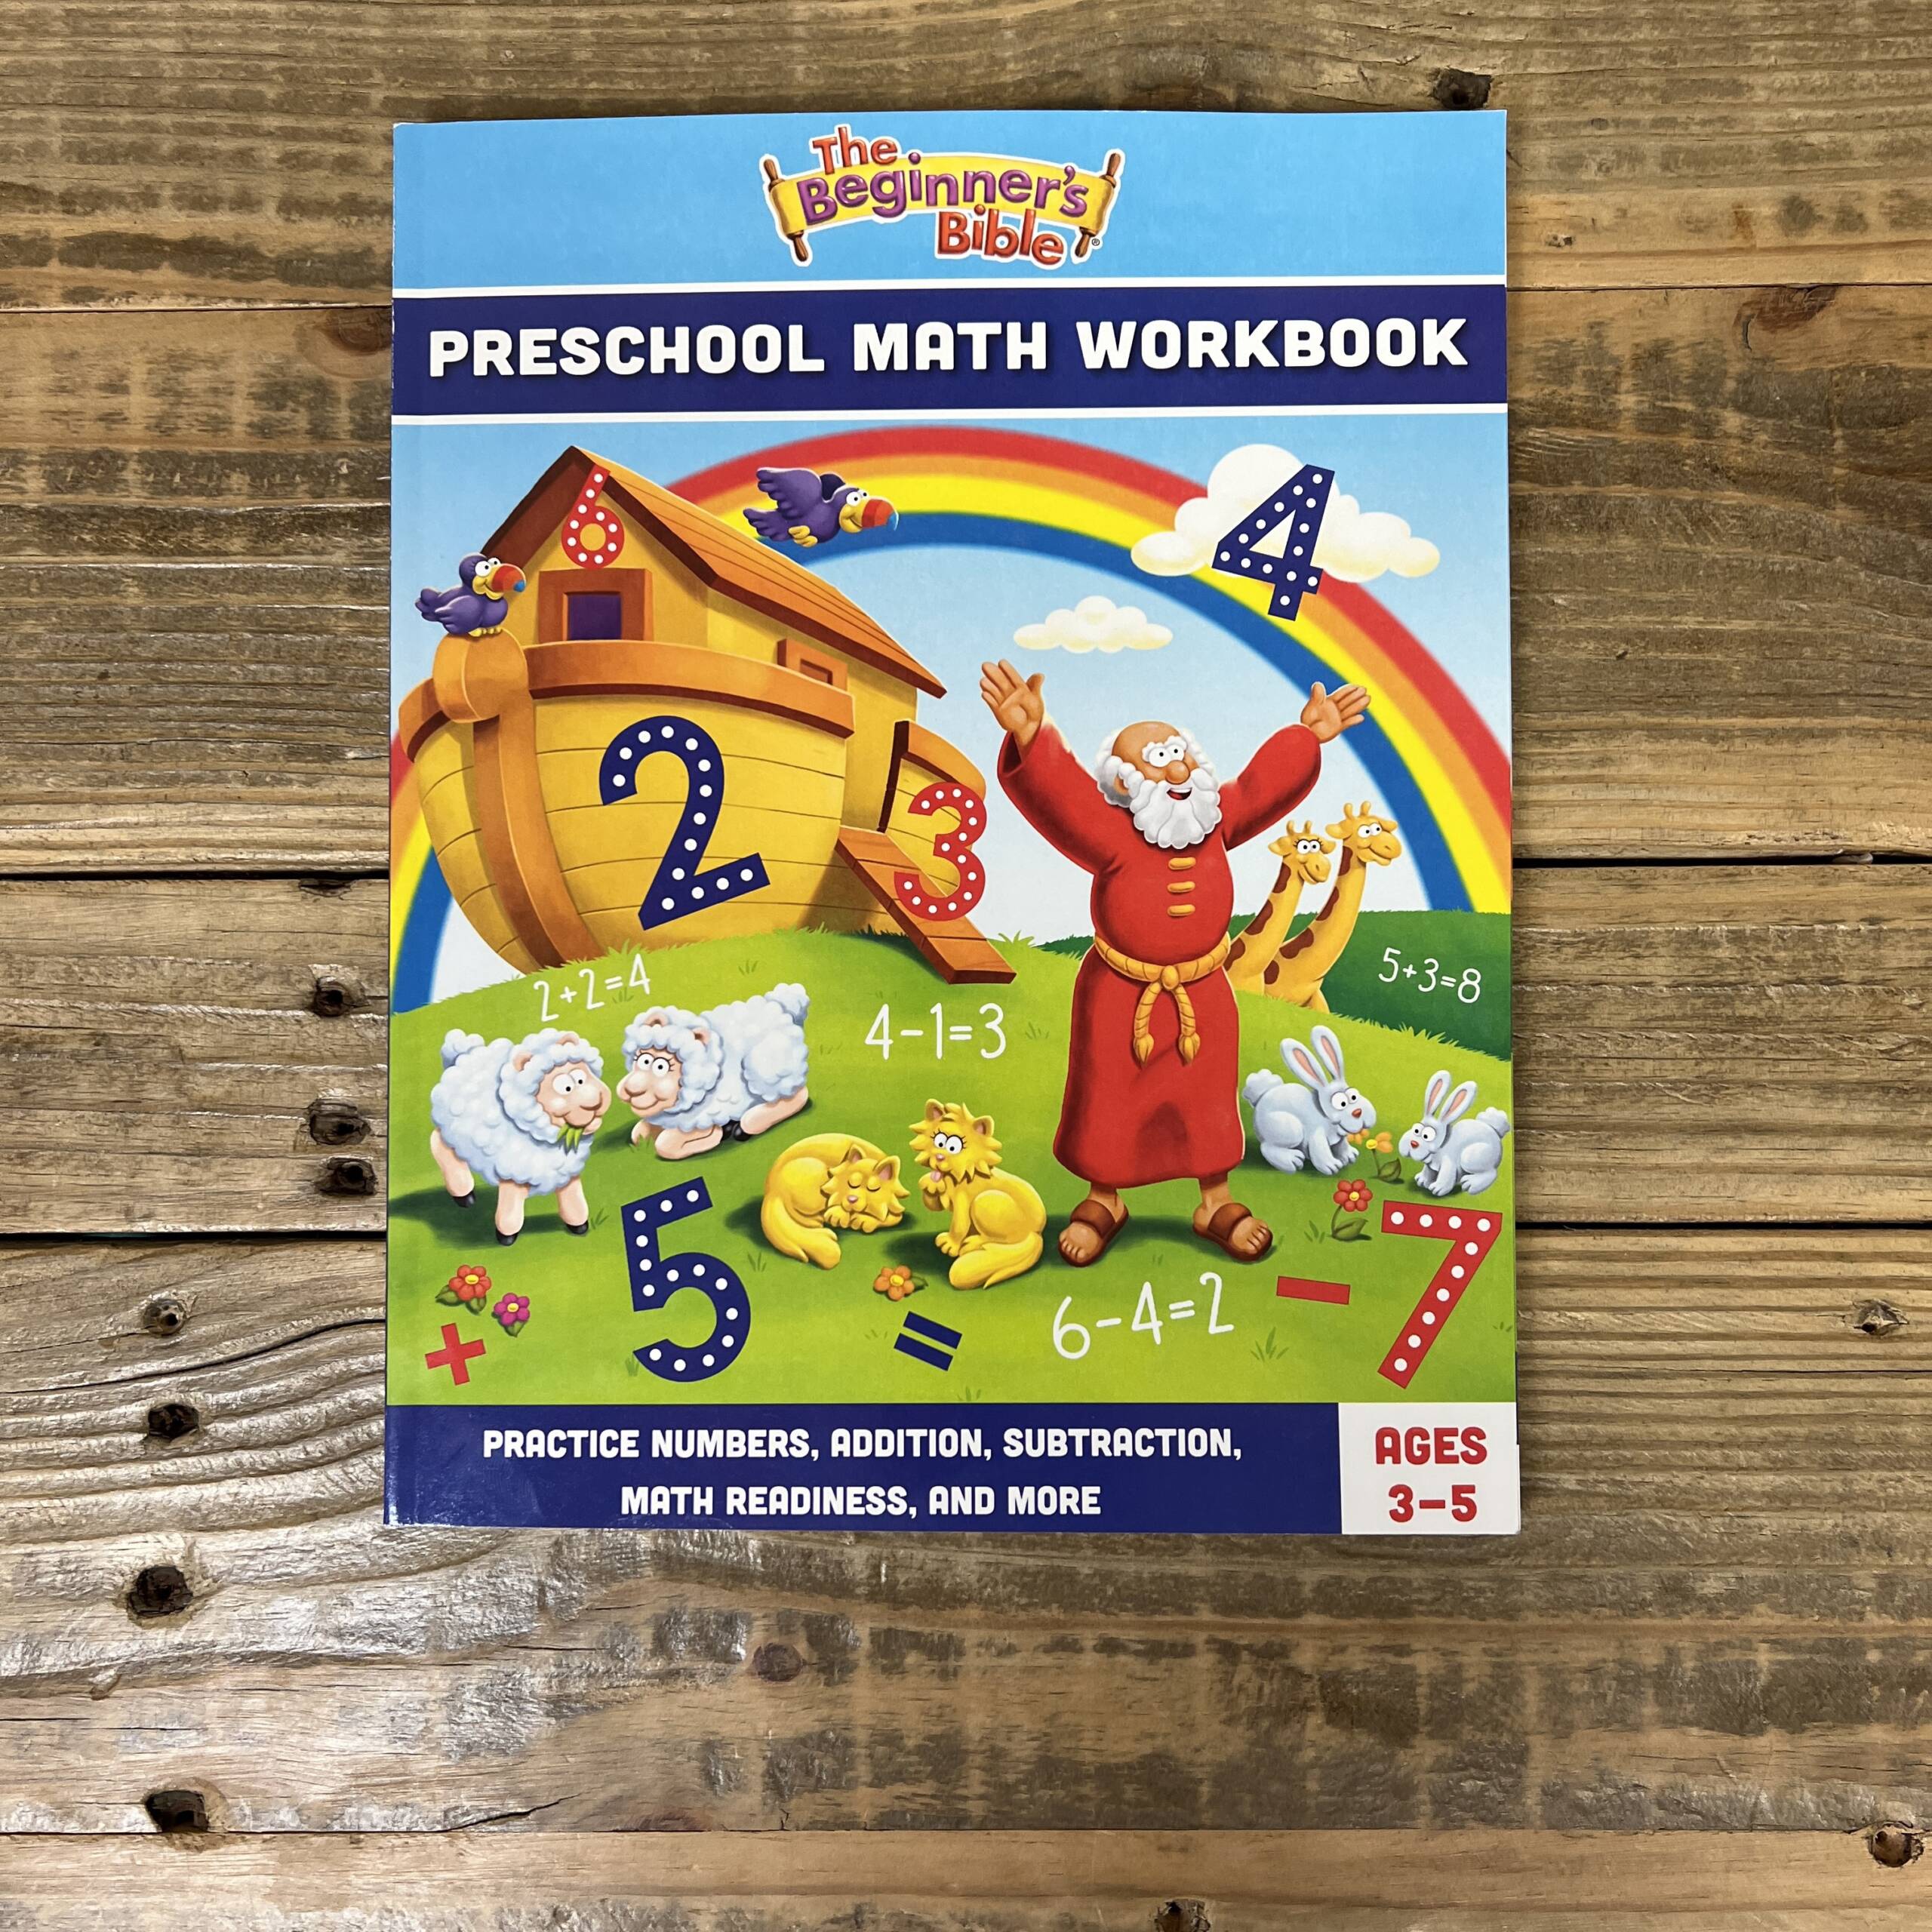 Bible　Workbook:　Life　–　Math　Readiness,　Practice　Addition,　Preschool　Math　More　Numbers,　Faith　The　and　Beginner's　Subtraction,